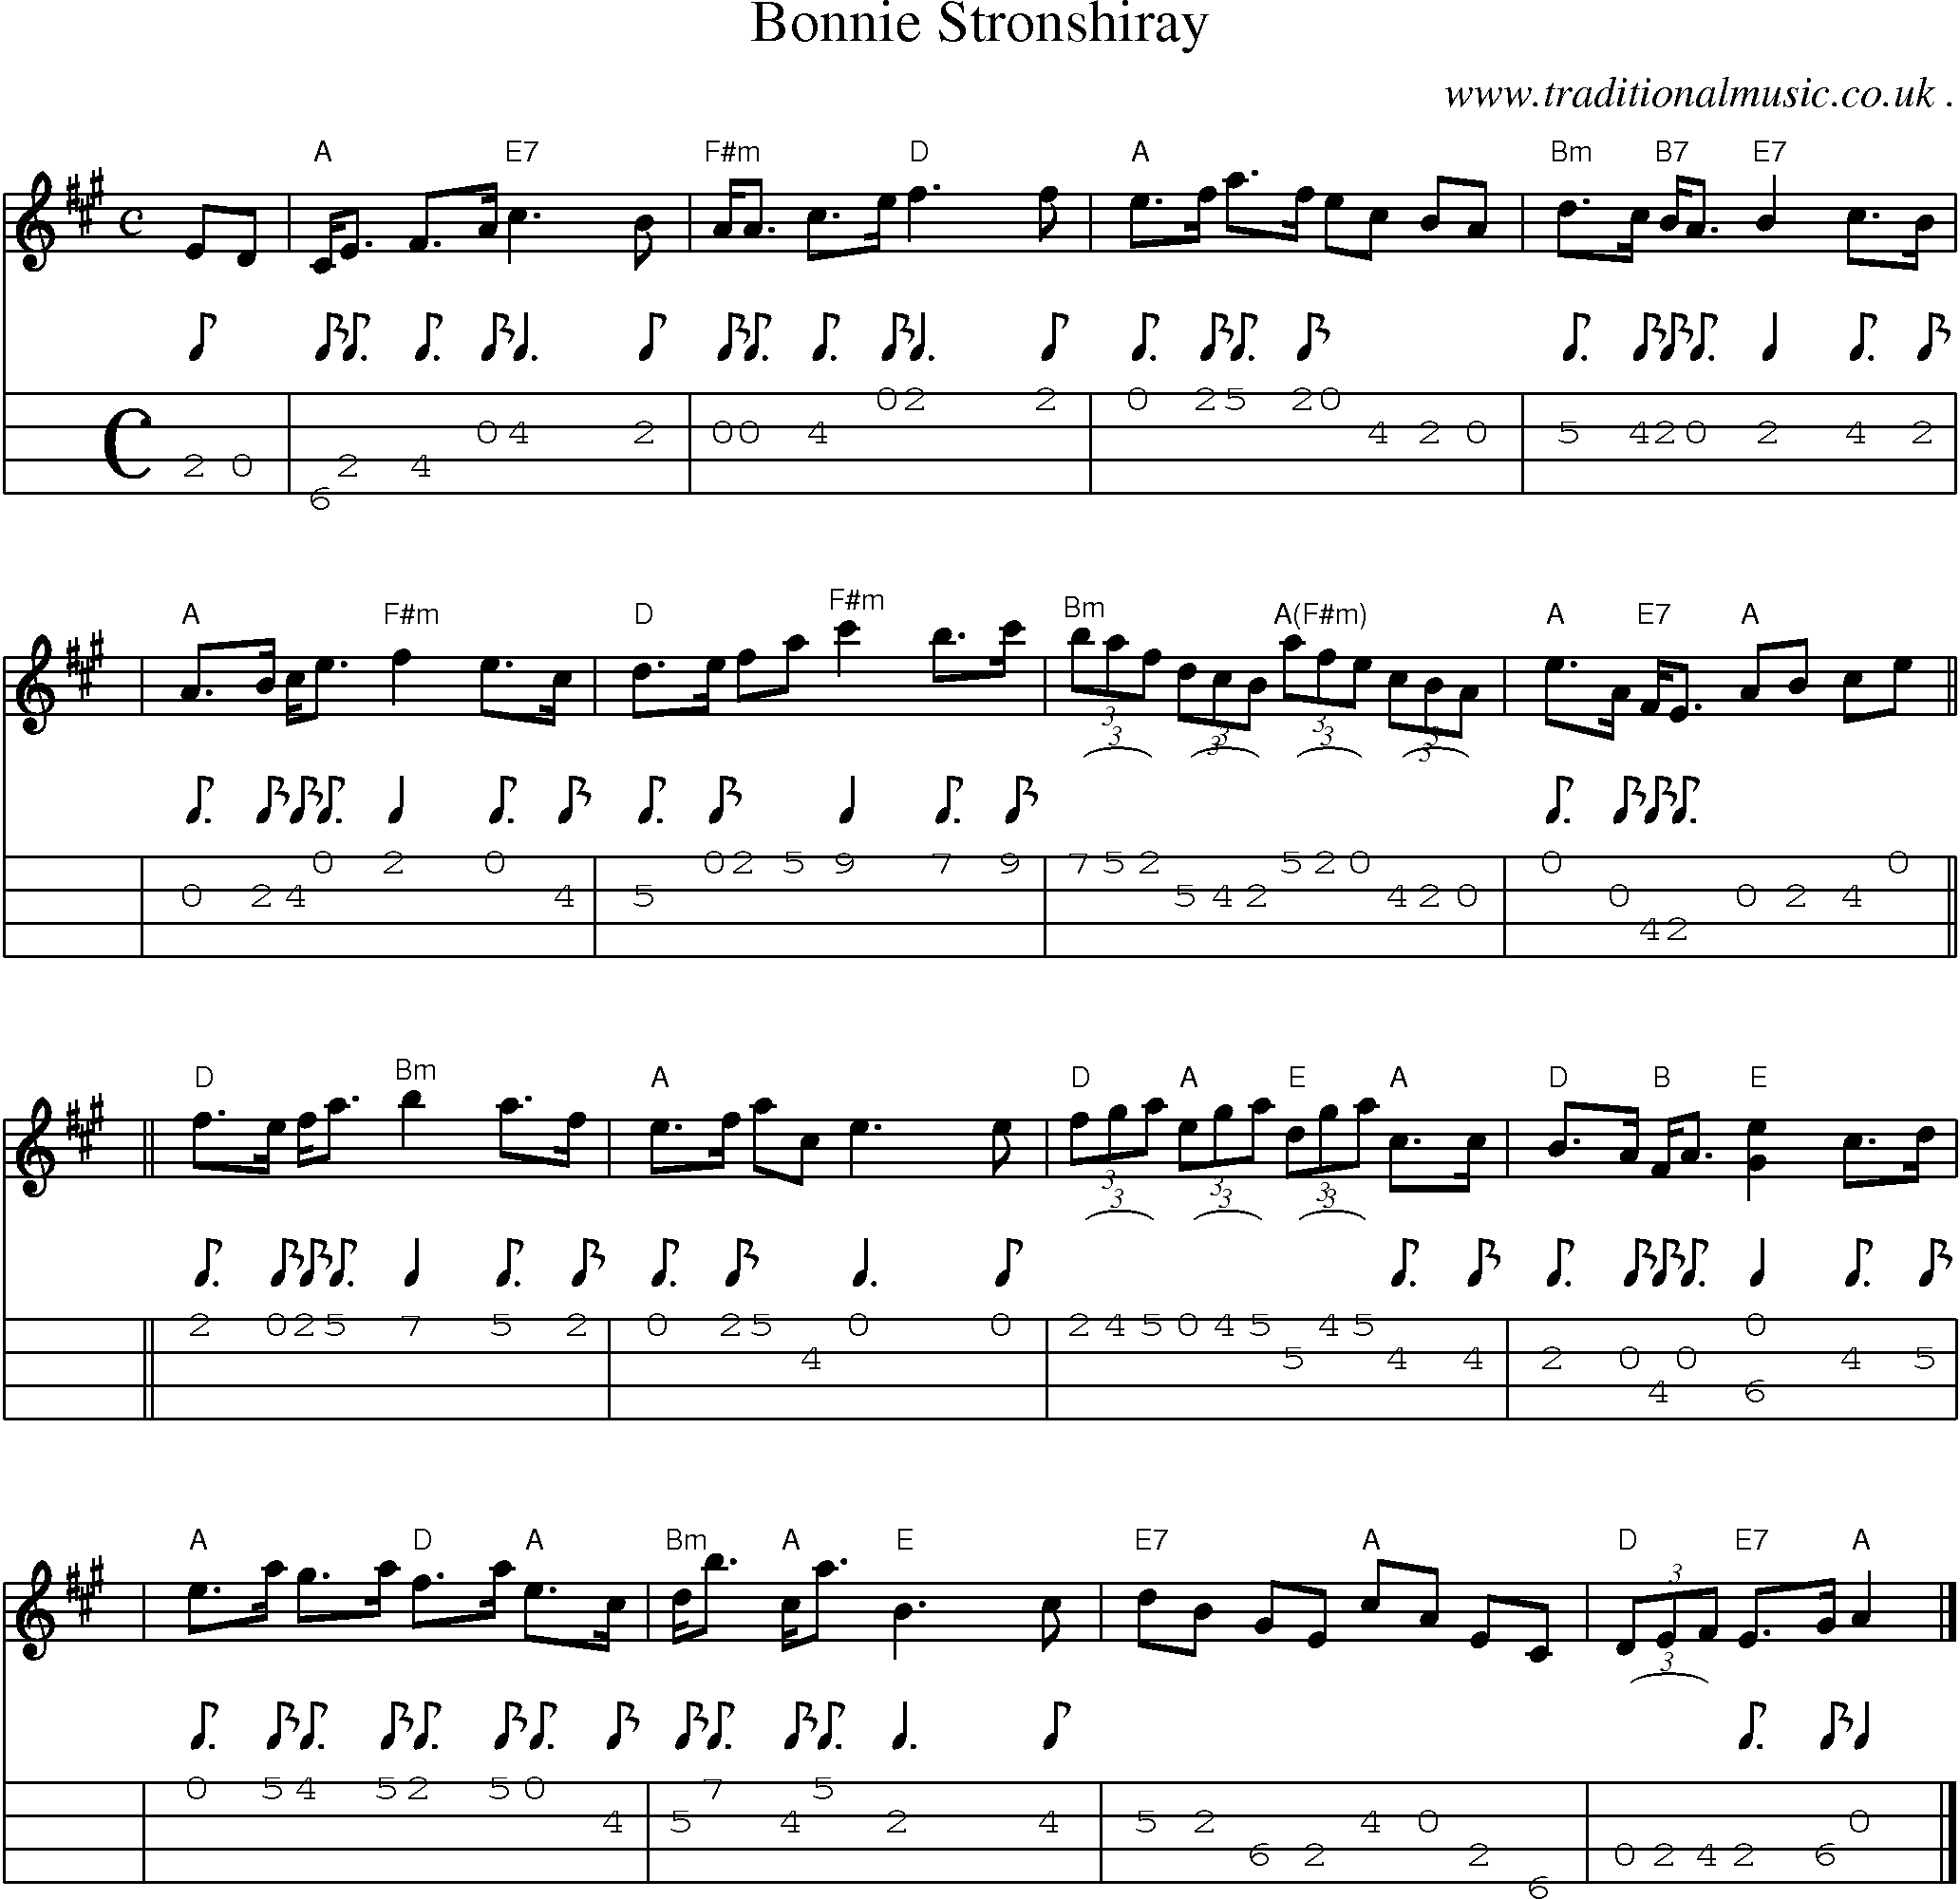 Sheet-music  score, Chords and Mandolin Tabs for Bonnie Stronshiray